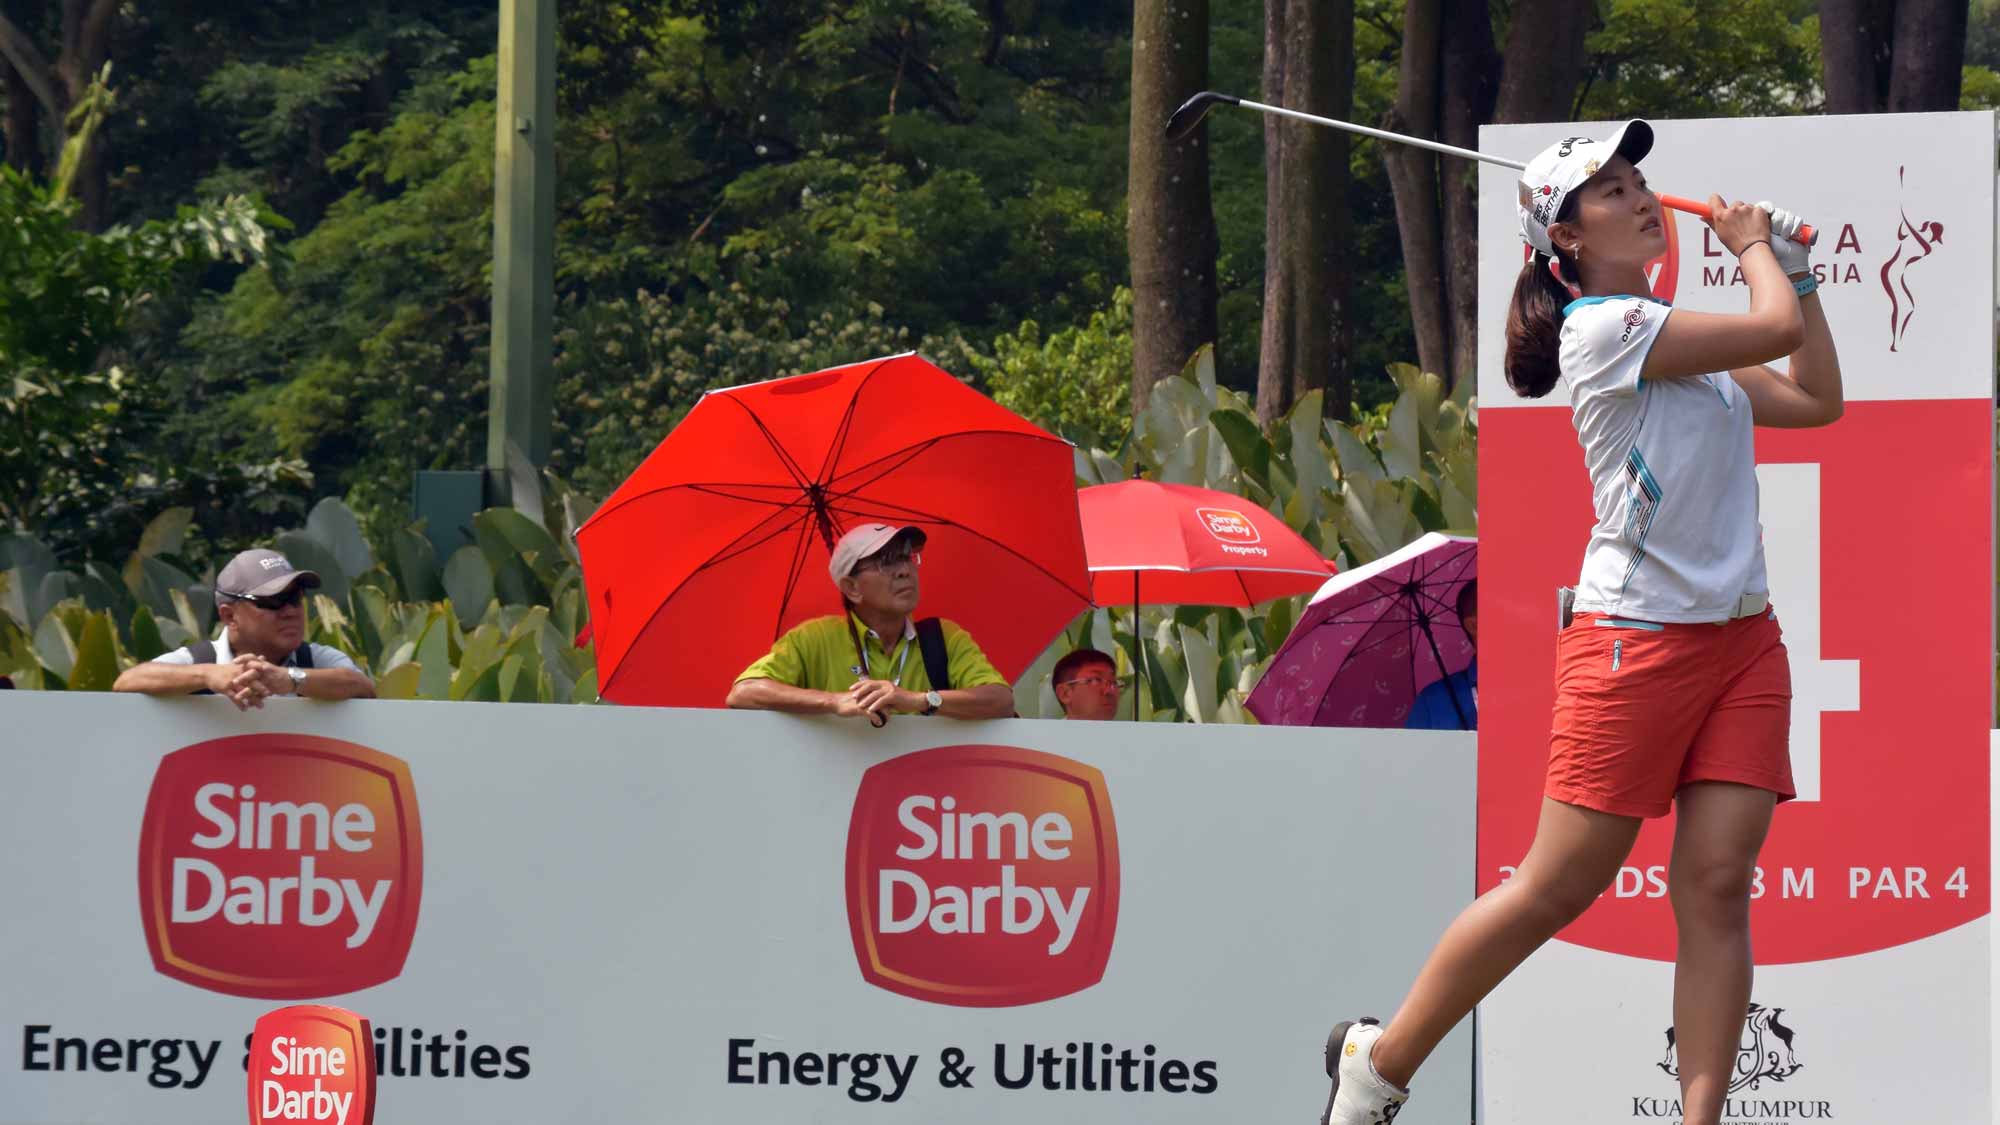 Xi Yu Lin of China plays her tee shot on the 4th hole during round two of the Sime Darby LPGA Tour at Kuala Lumpur Golf & Country Club